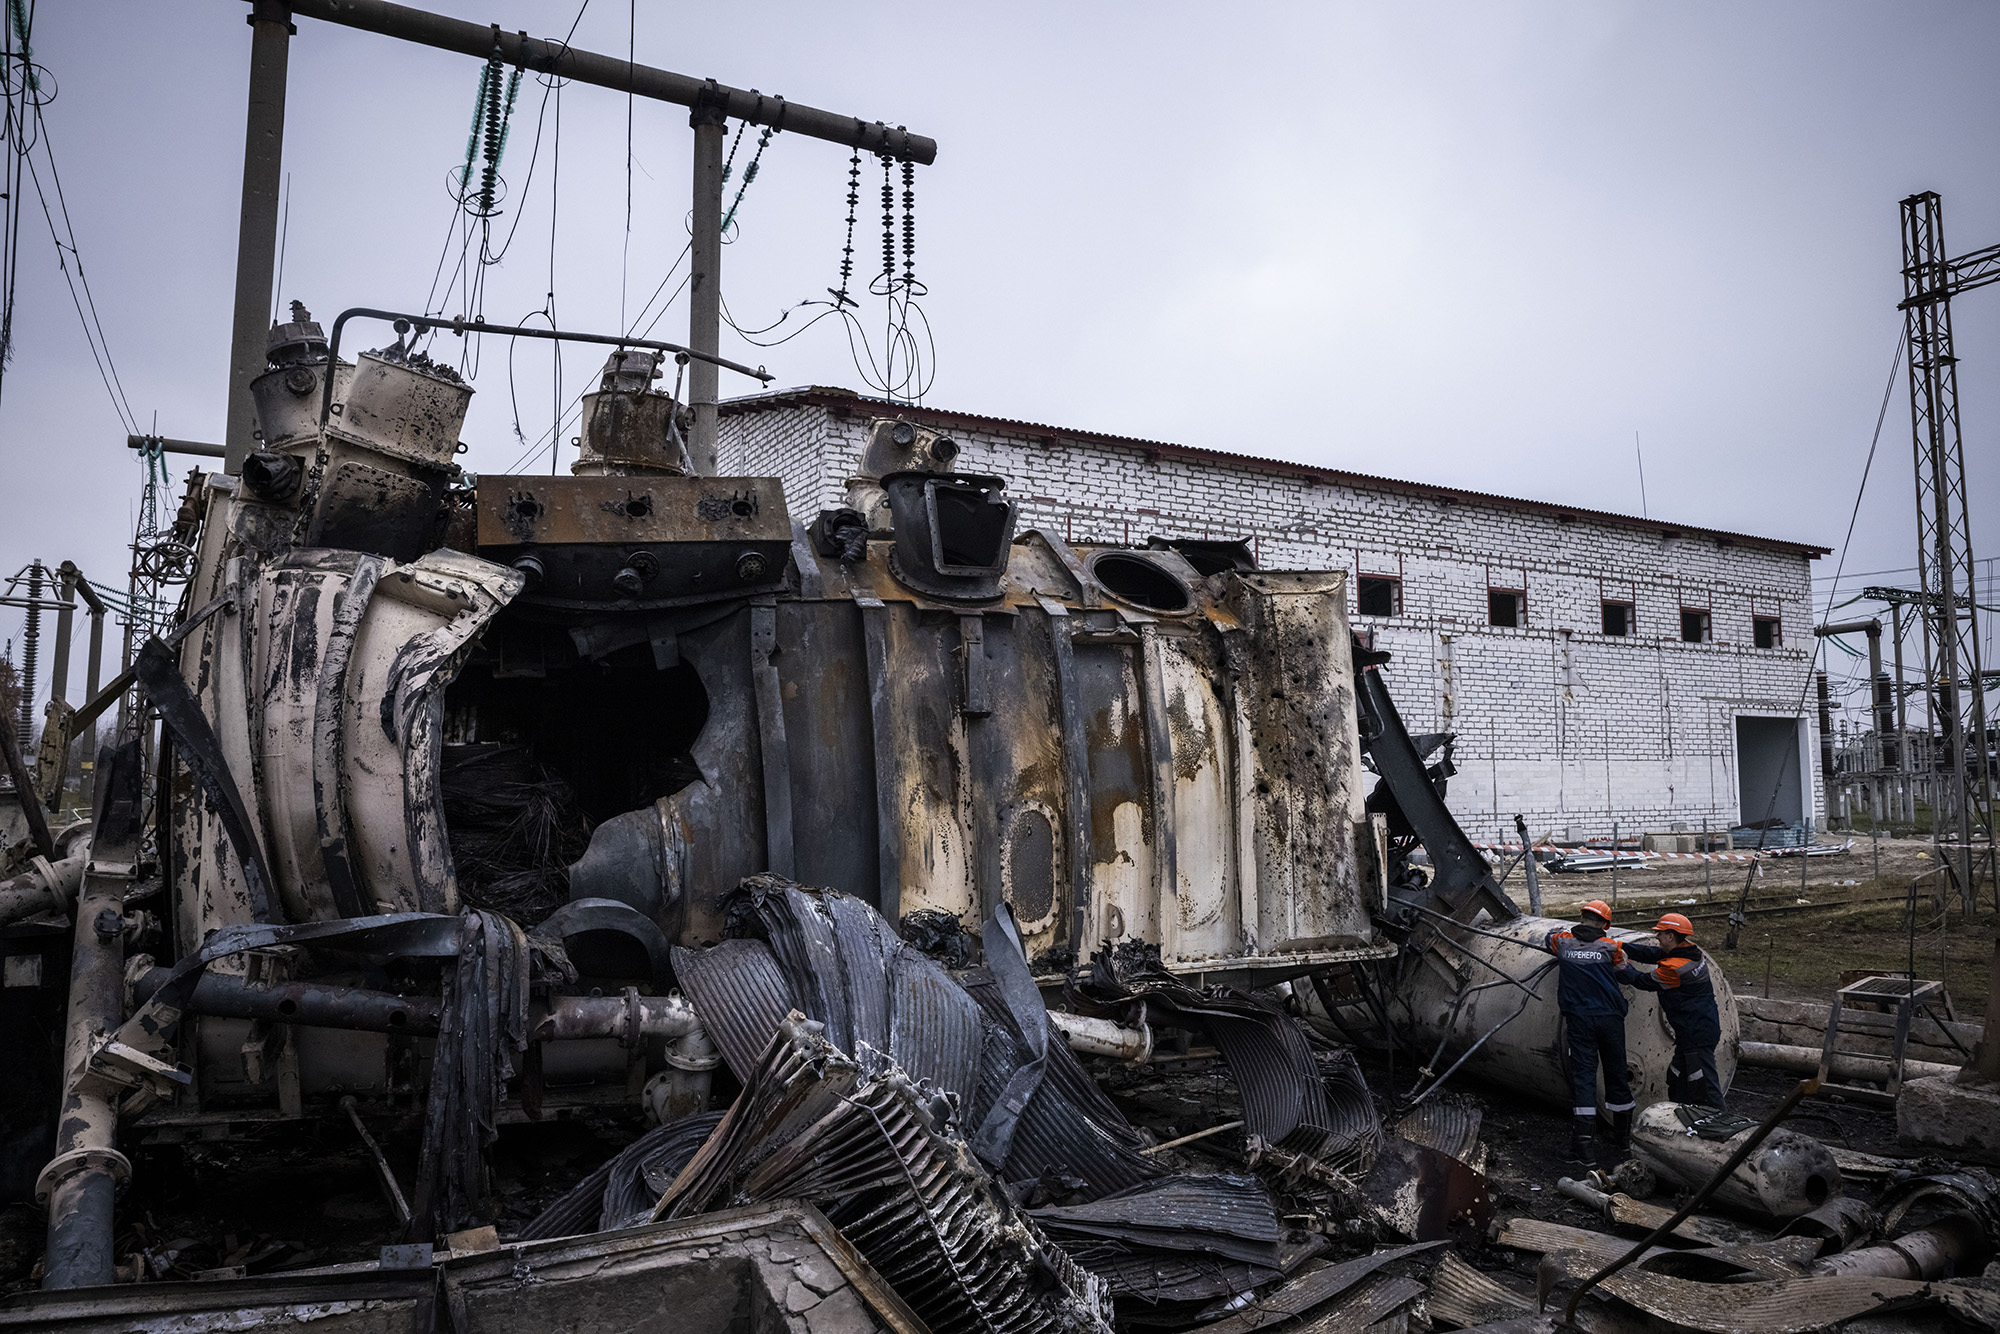 Workers dismantle an autotransformer which stands completely destroyed after the Ukrenergo high voltage power substation was hit by a missile strike on October 17, in central Ukraine.